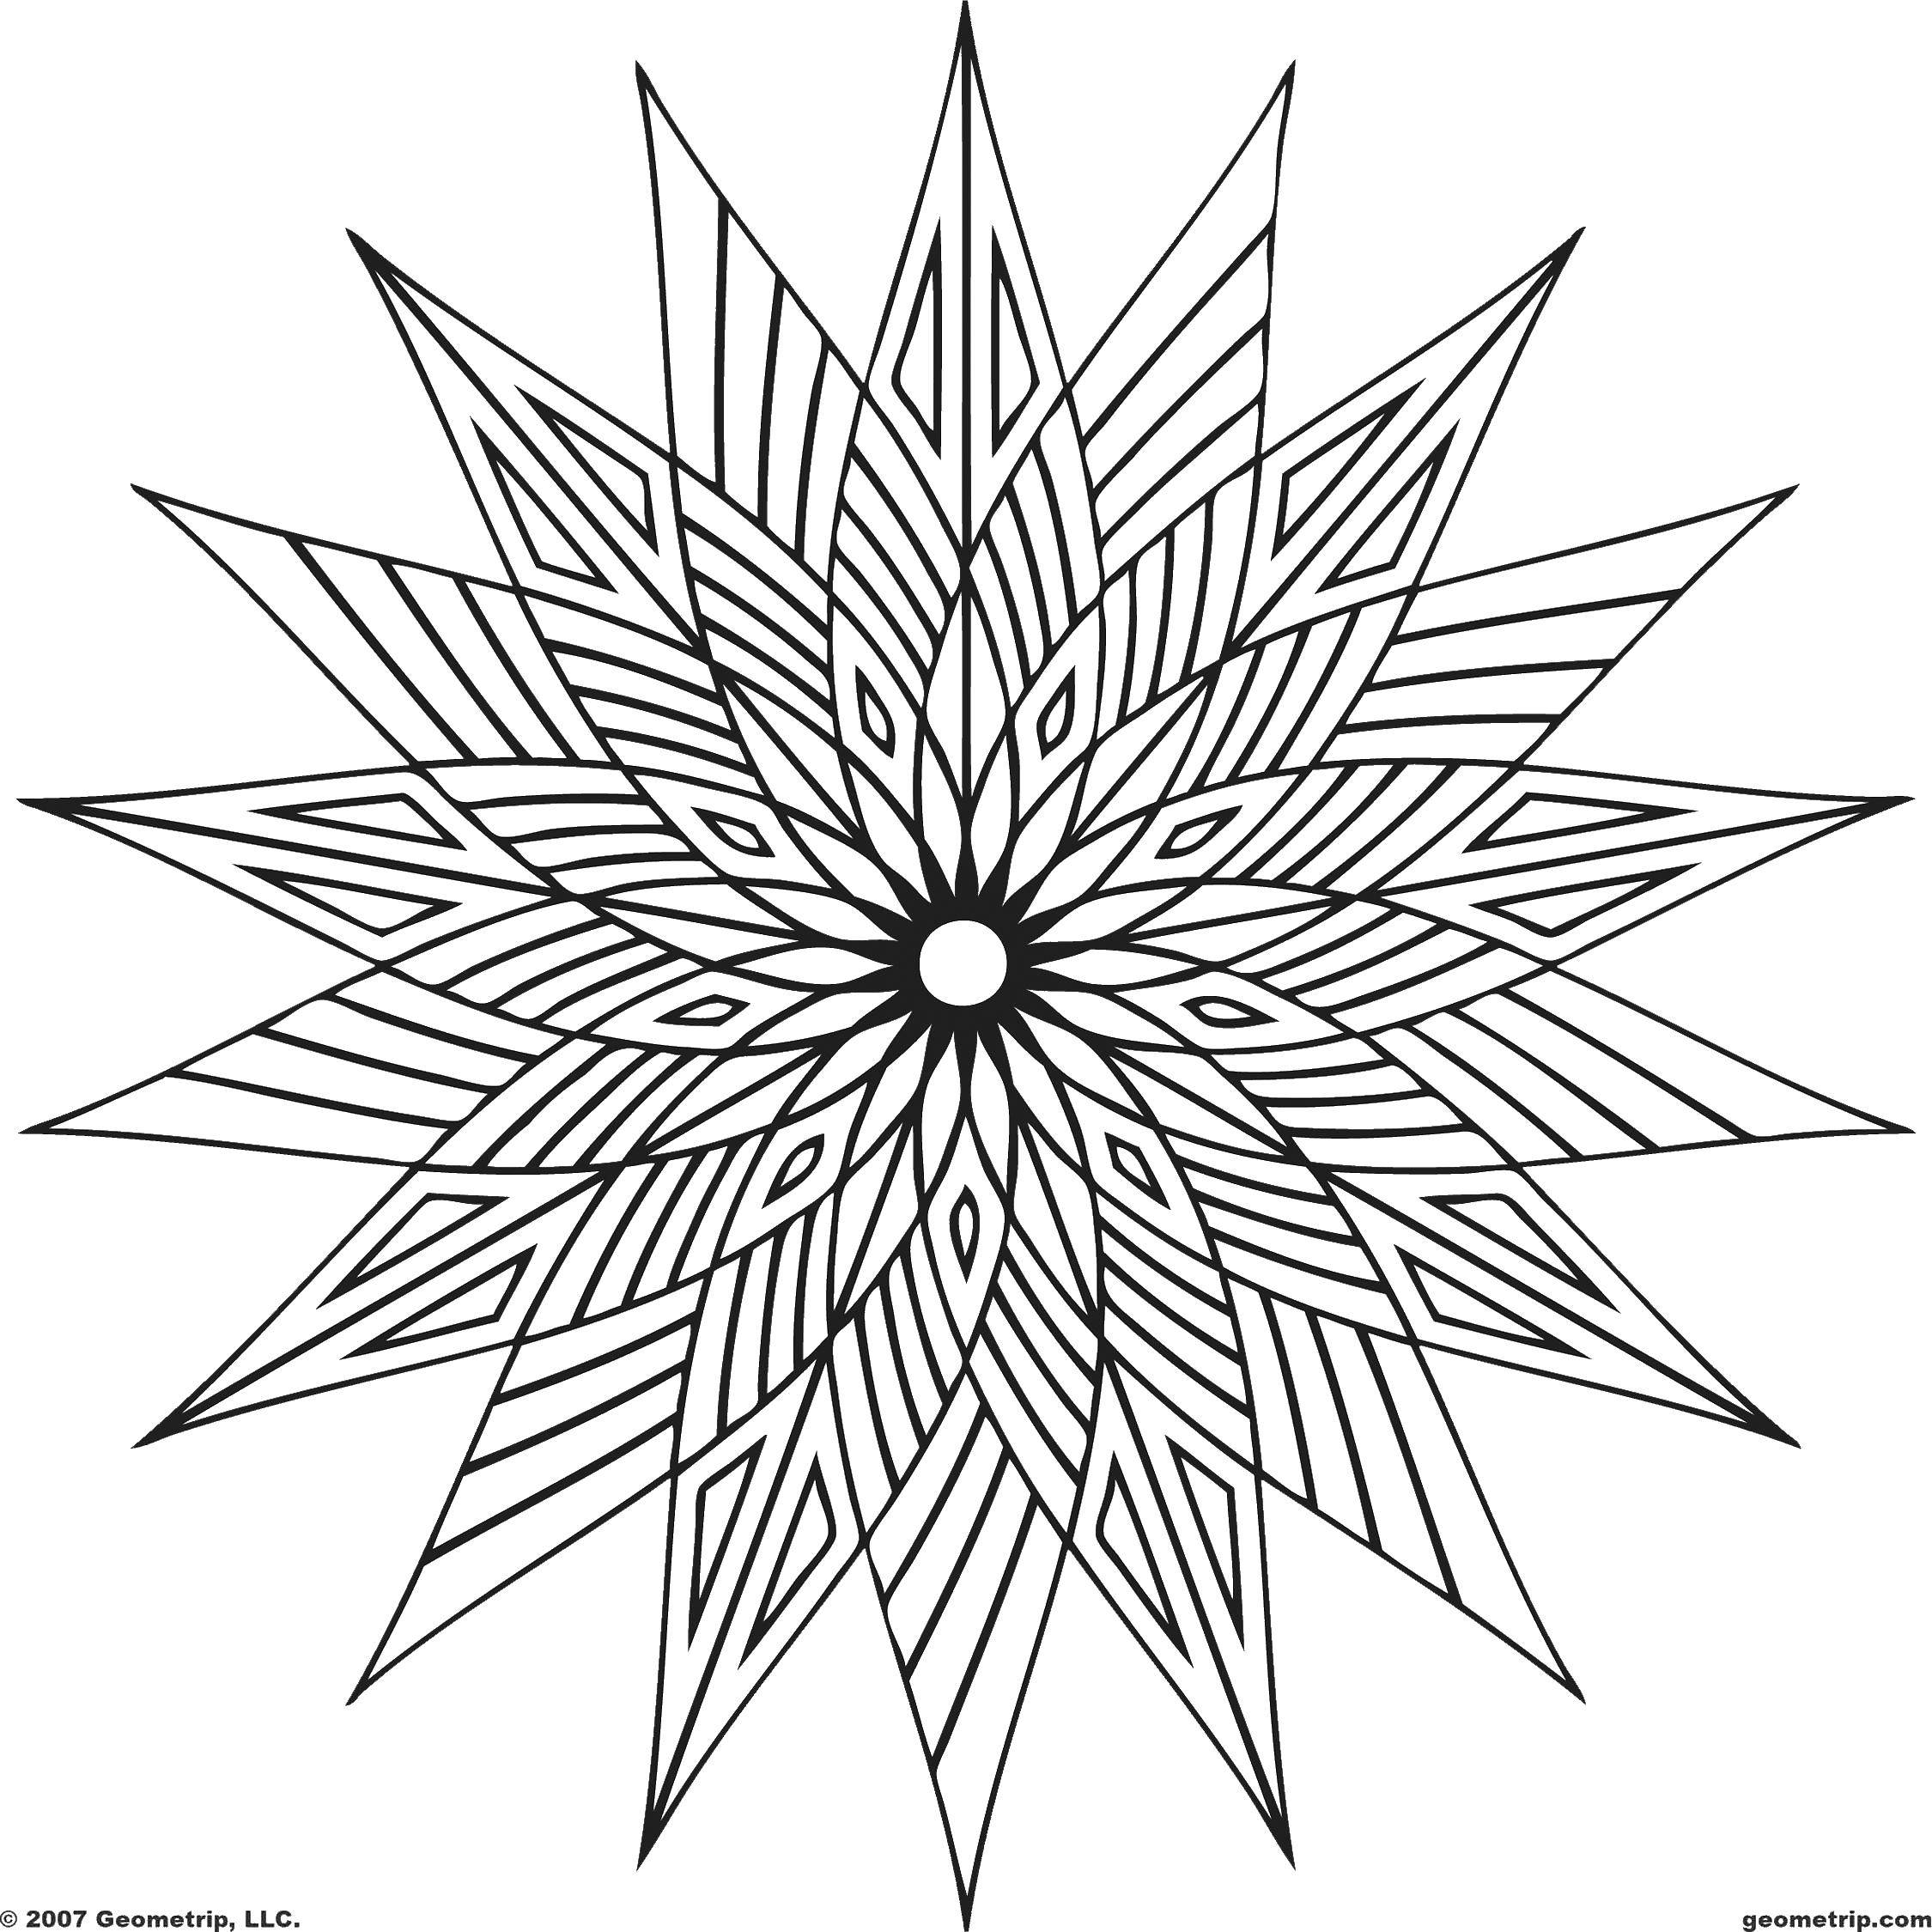 Coloring Pattern flower. Category Patterns. Tags:  pattern, flowers, flower.